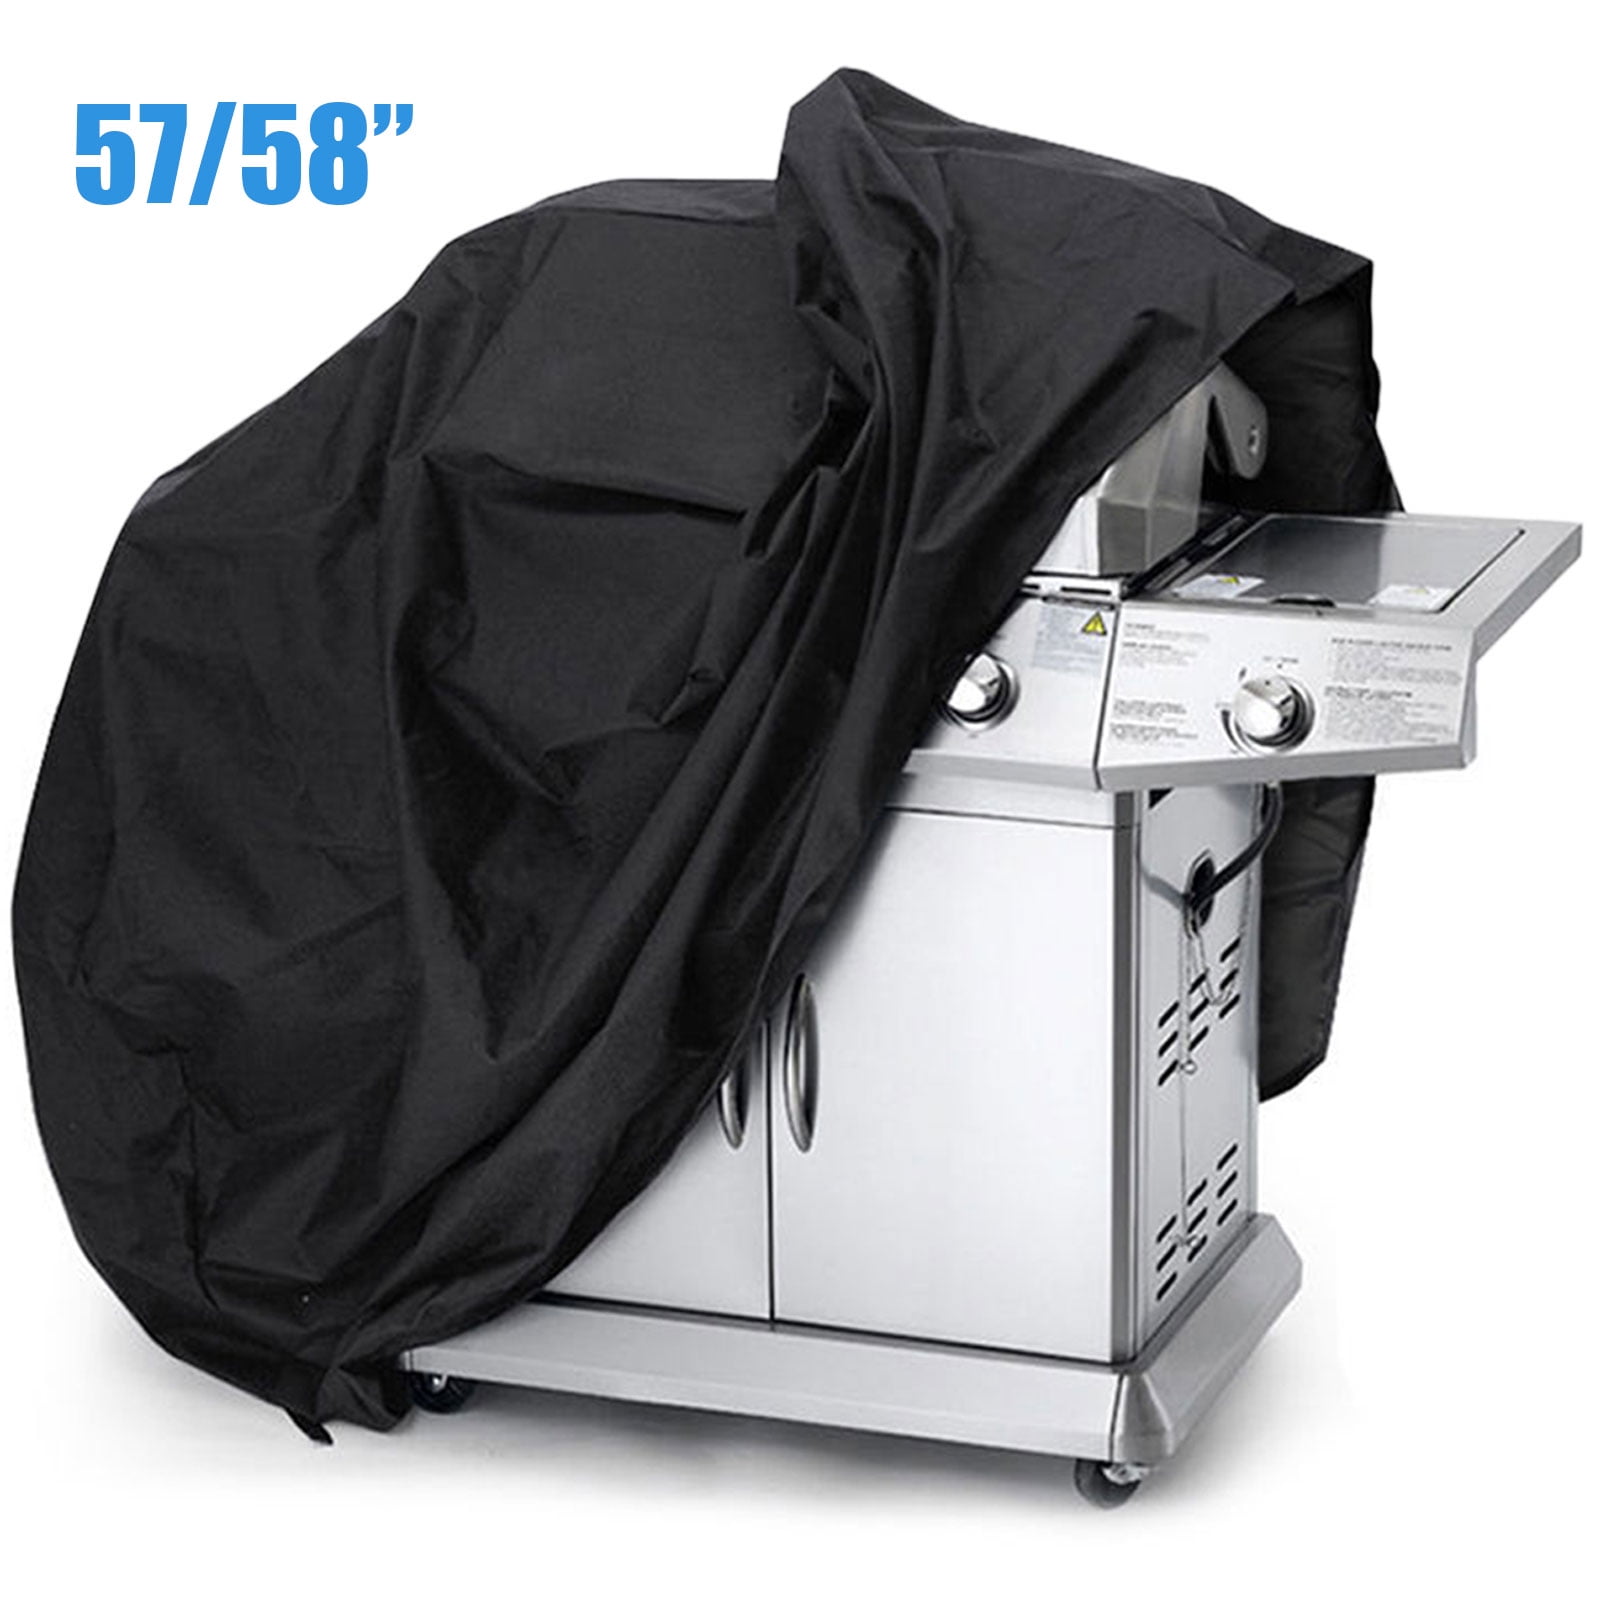 Waterproof Large 65 inch BBQ Grill Cover for Weber Charbroil Nexgrill Brinkmann 